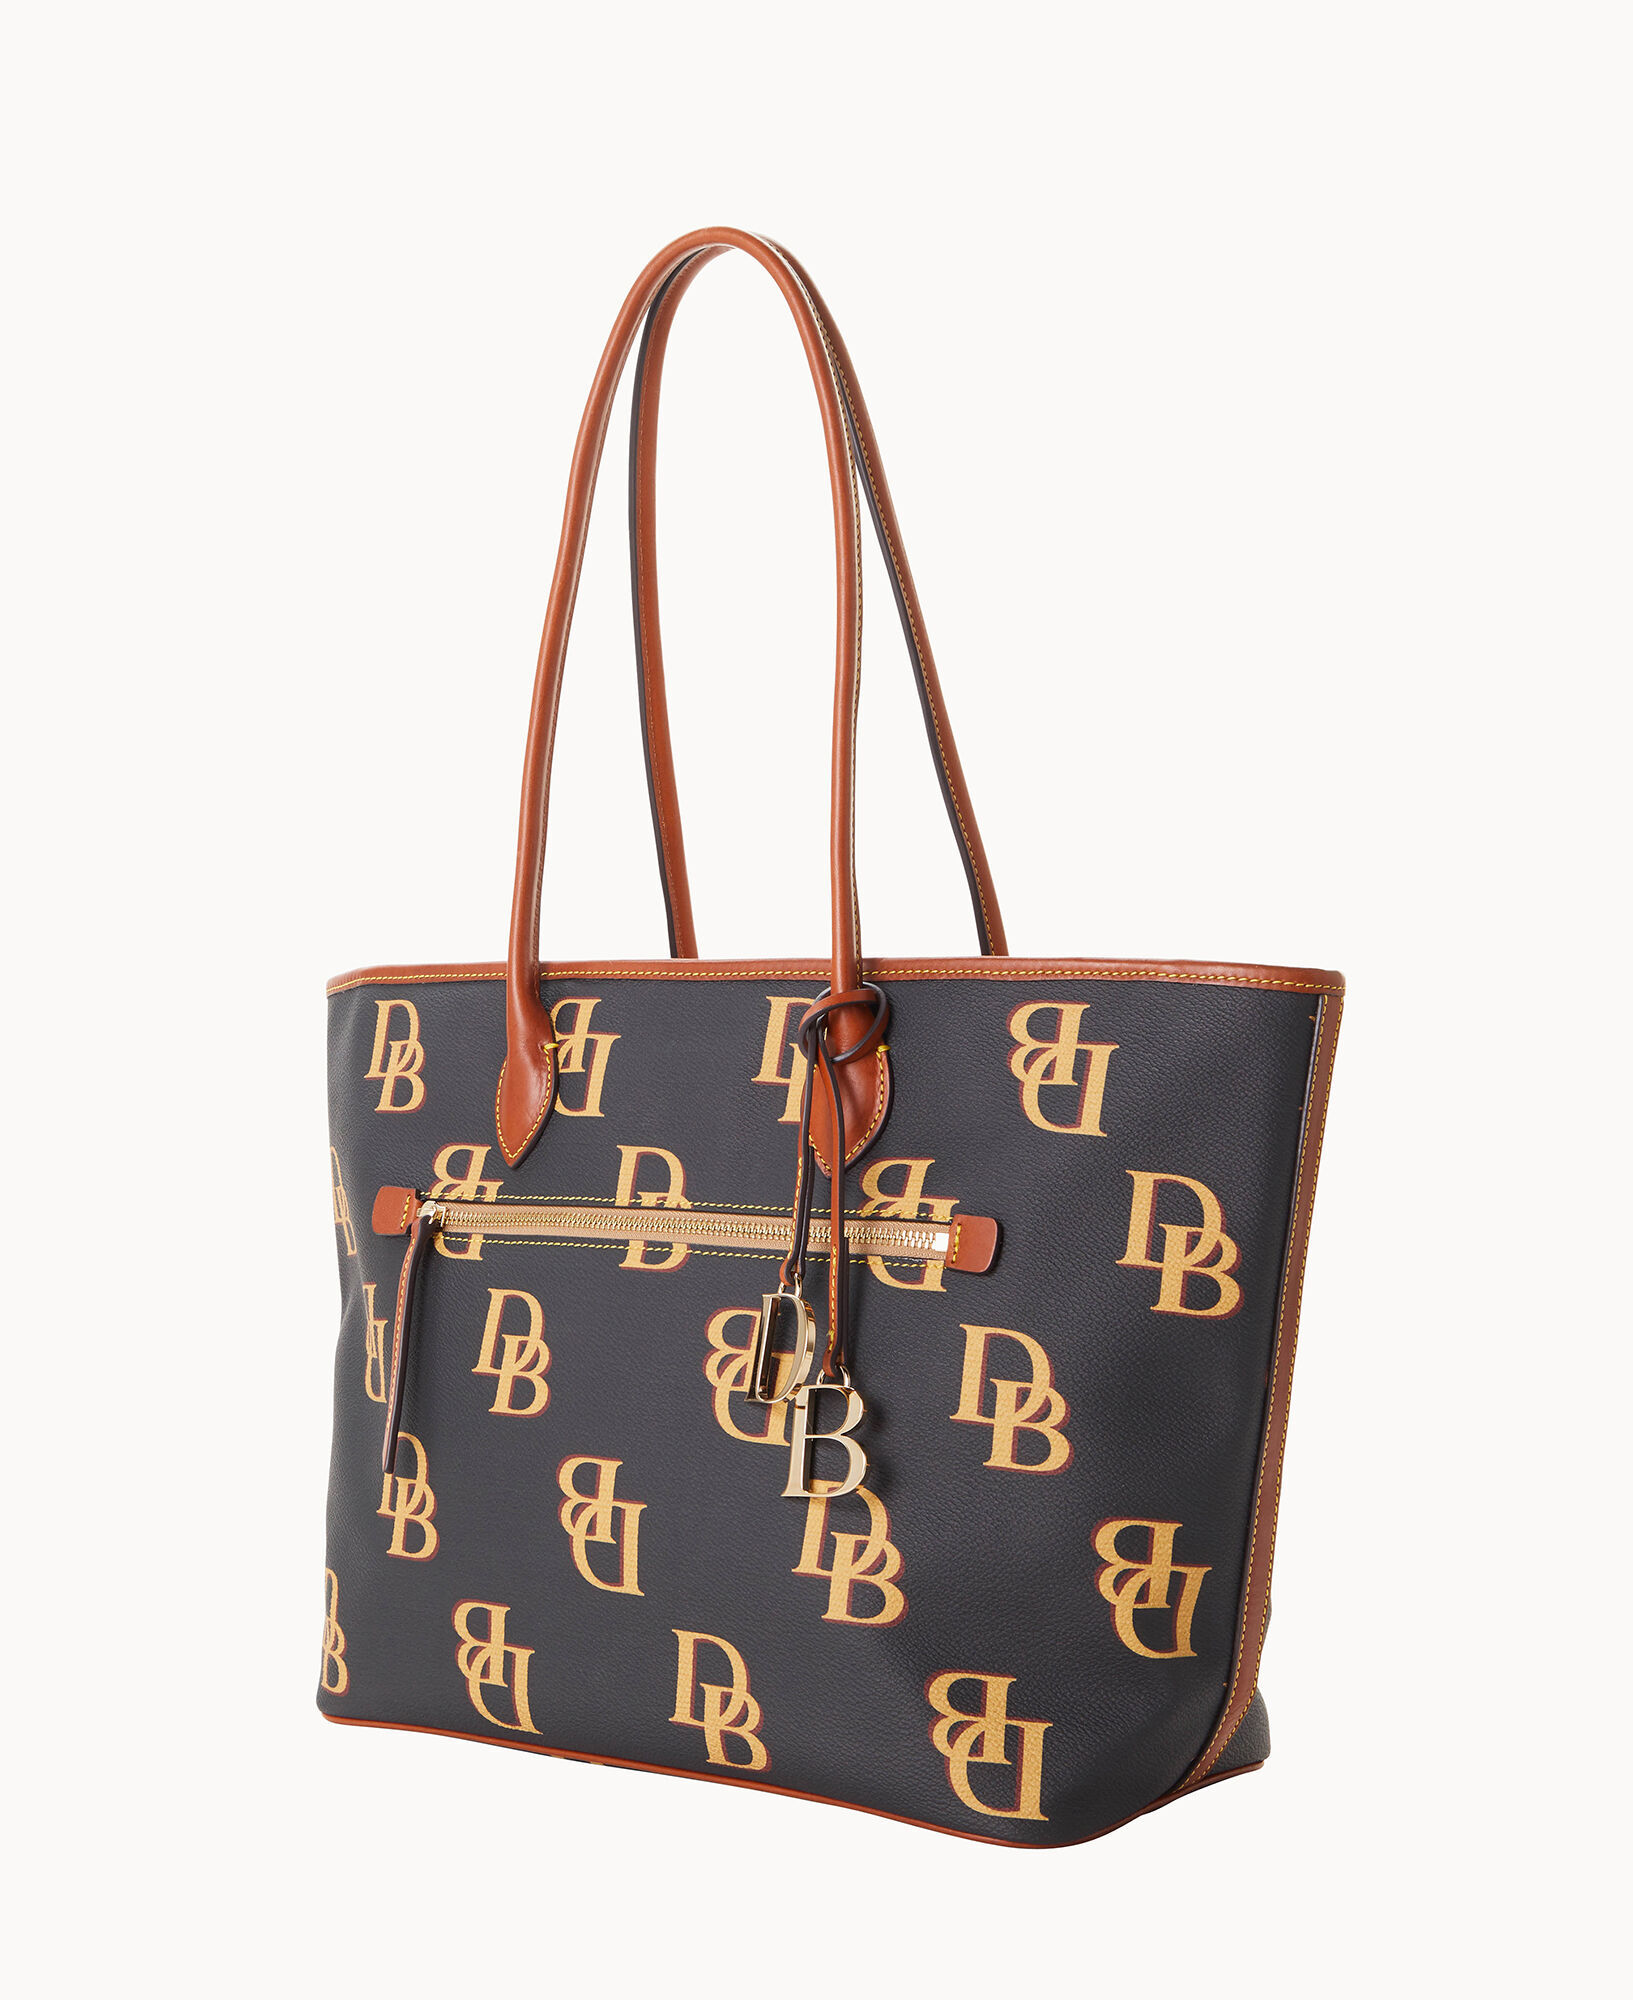 Dooney & Bourke Tote Bags for Women for sale